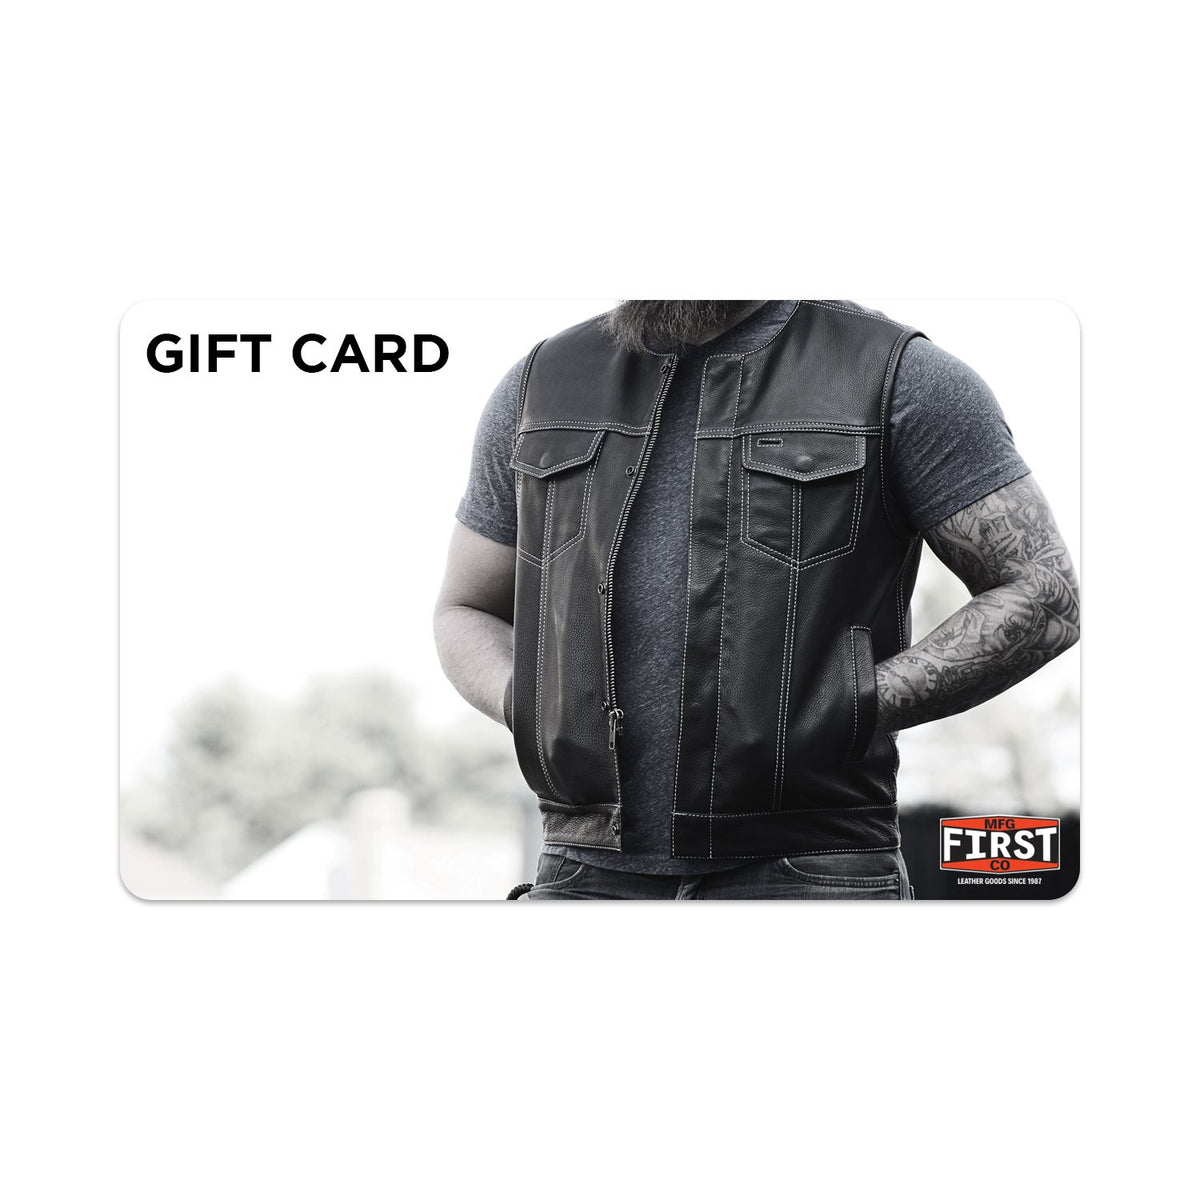 Buy a Pair of Jeans Get a $50 Gift Card